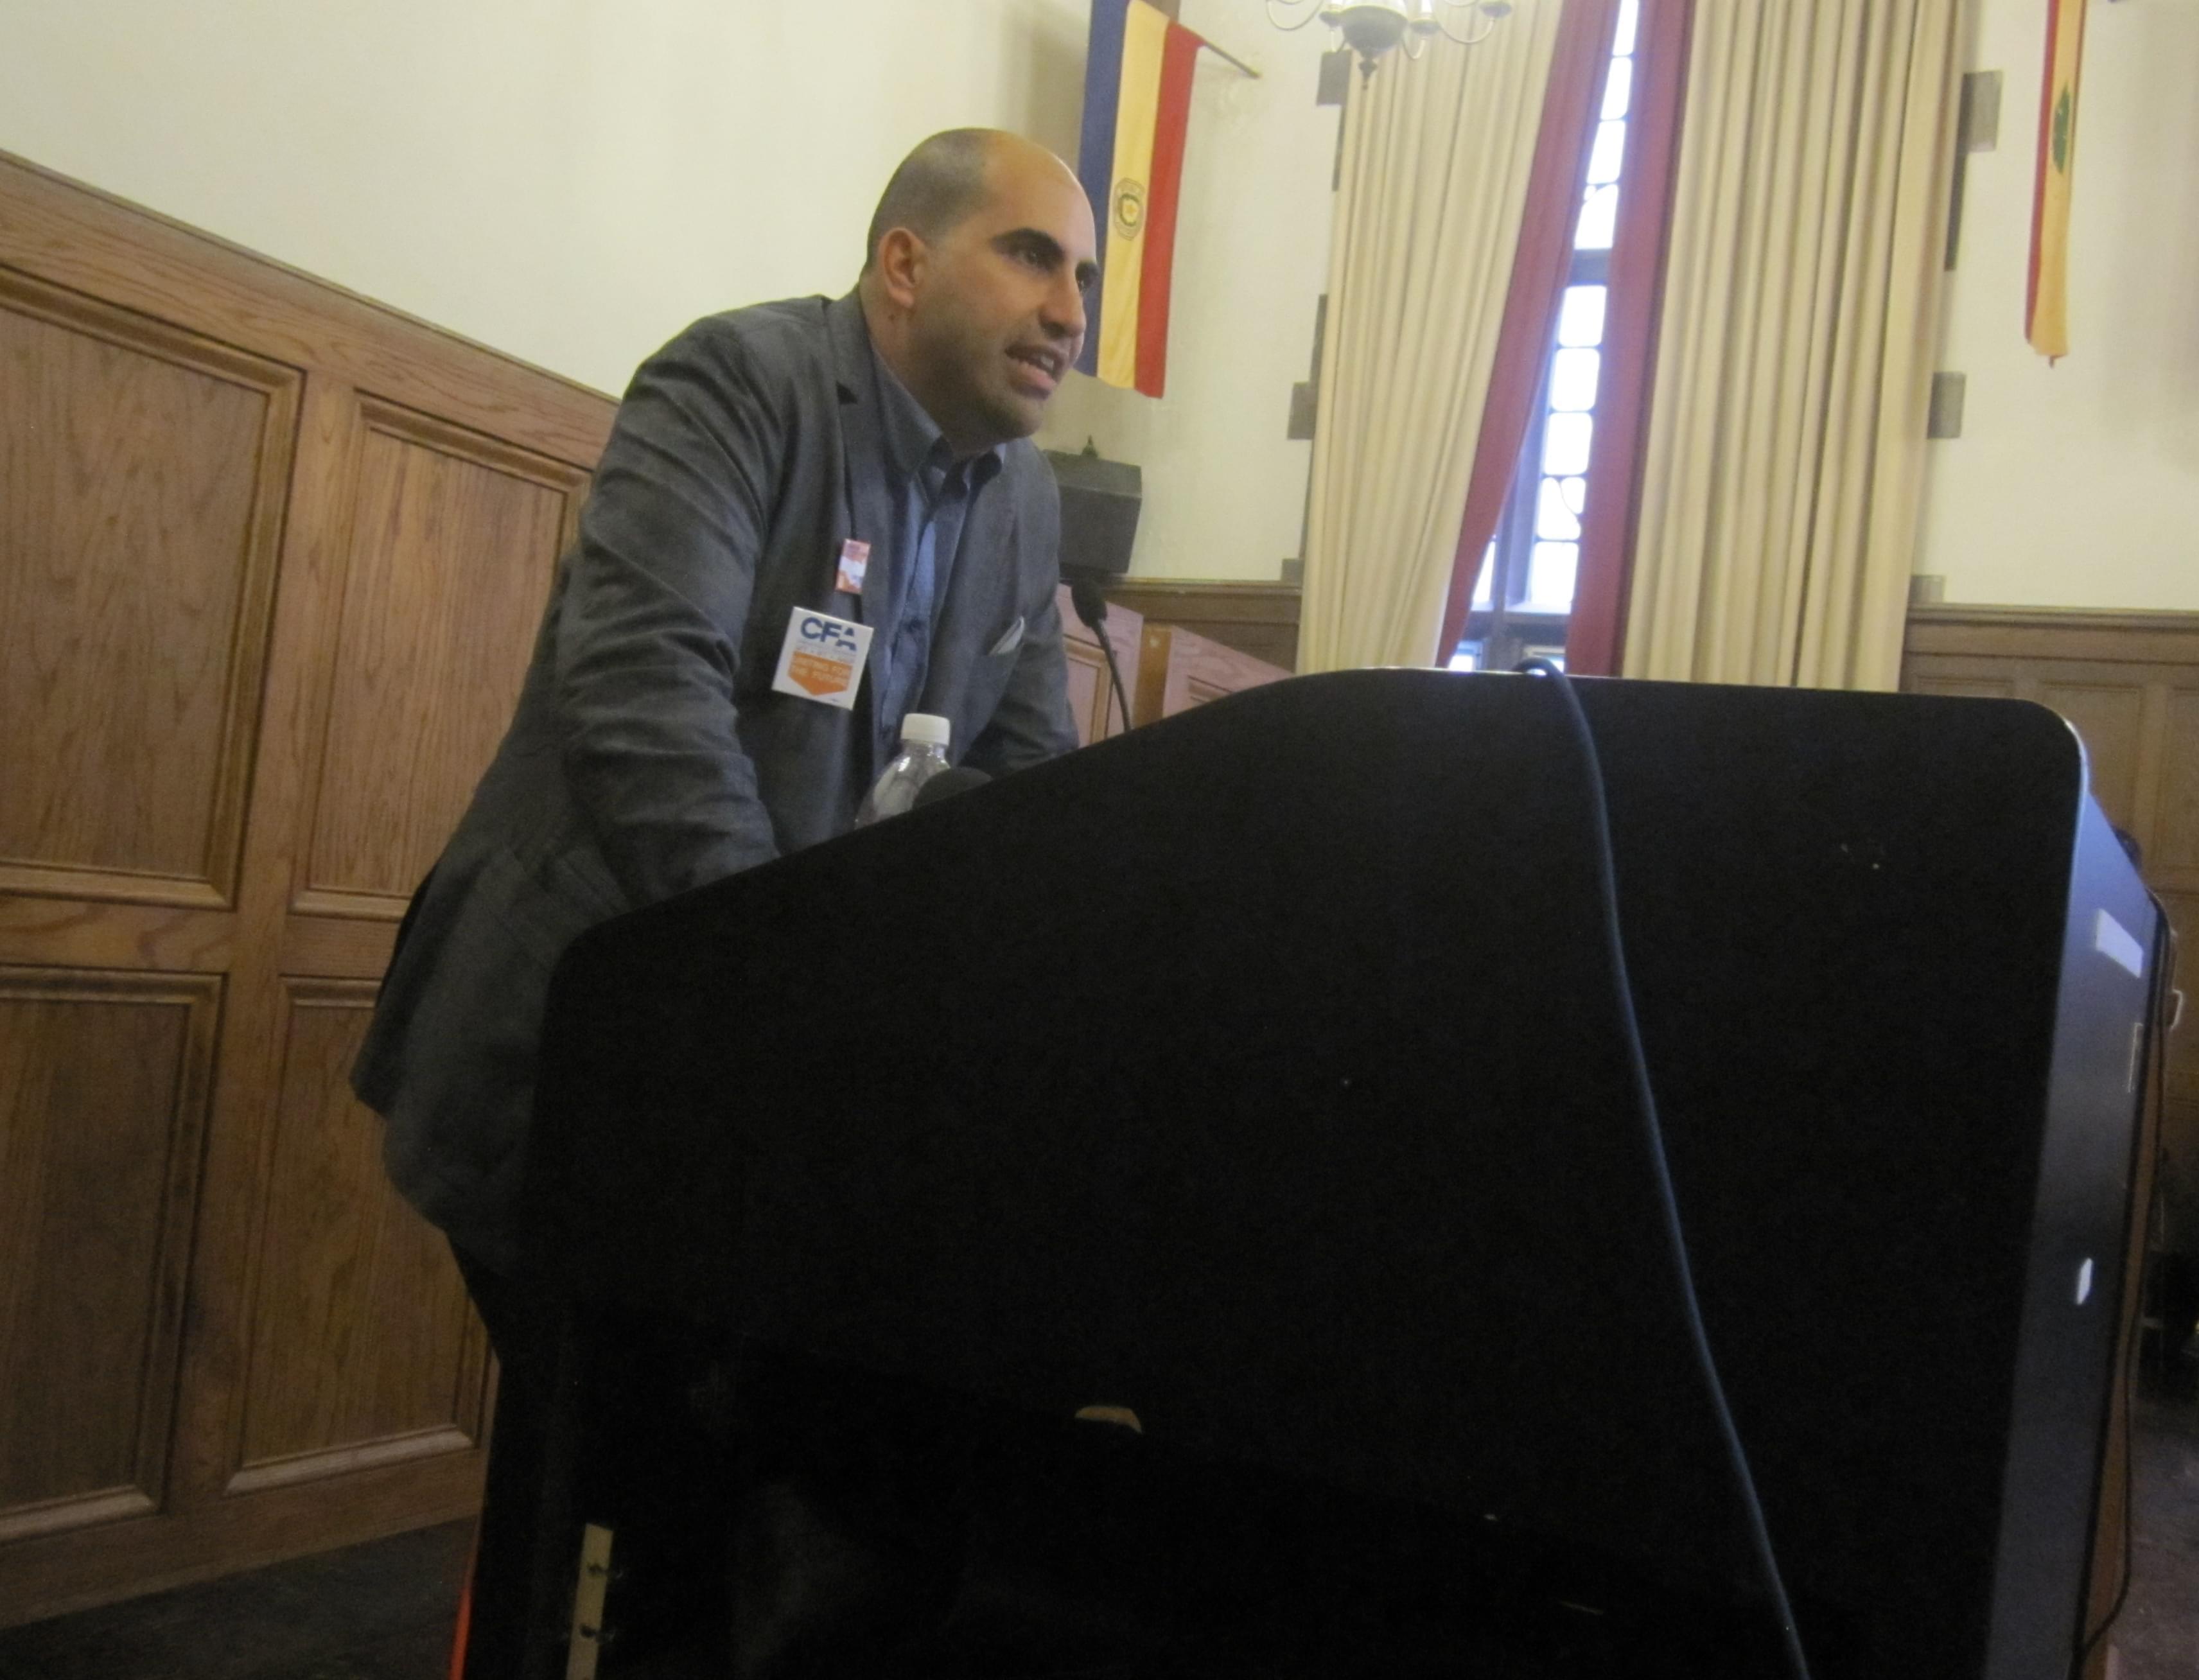 Steven Salaita during his appearance at the University YMCA on September 9, 2014.